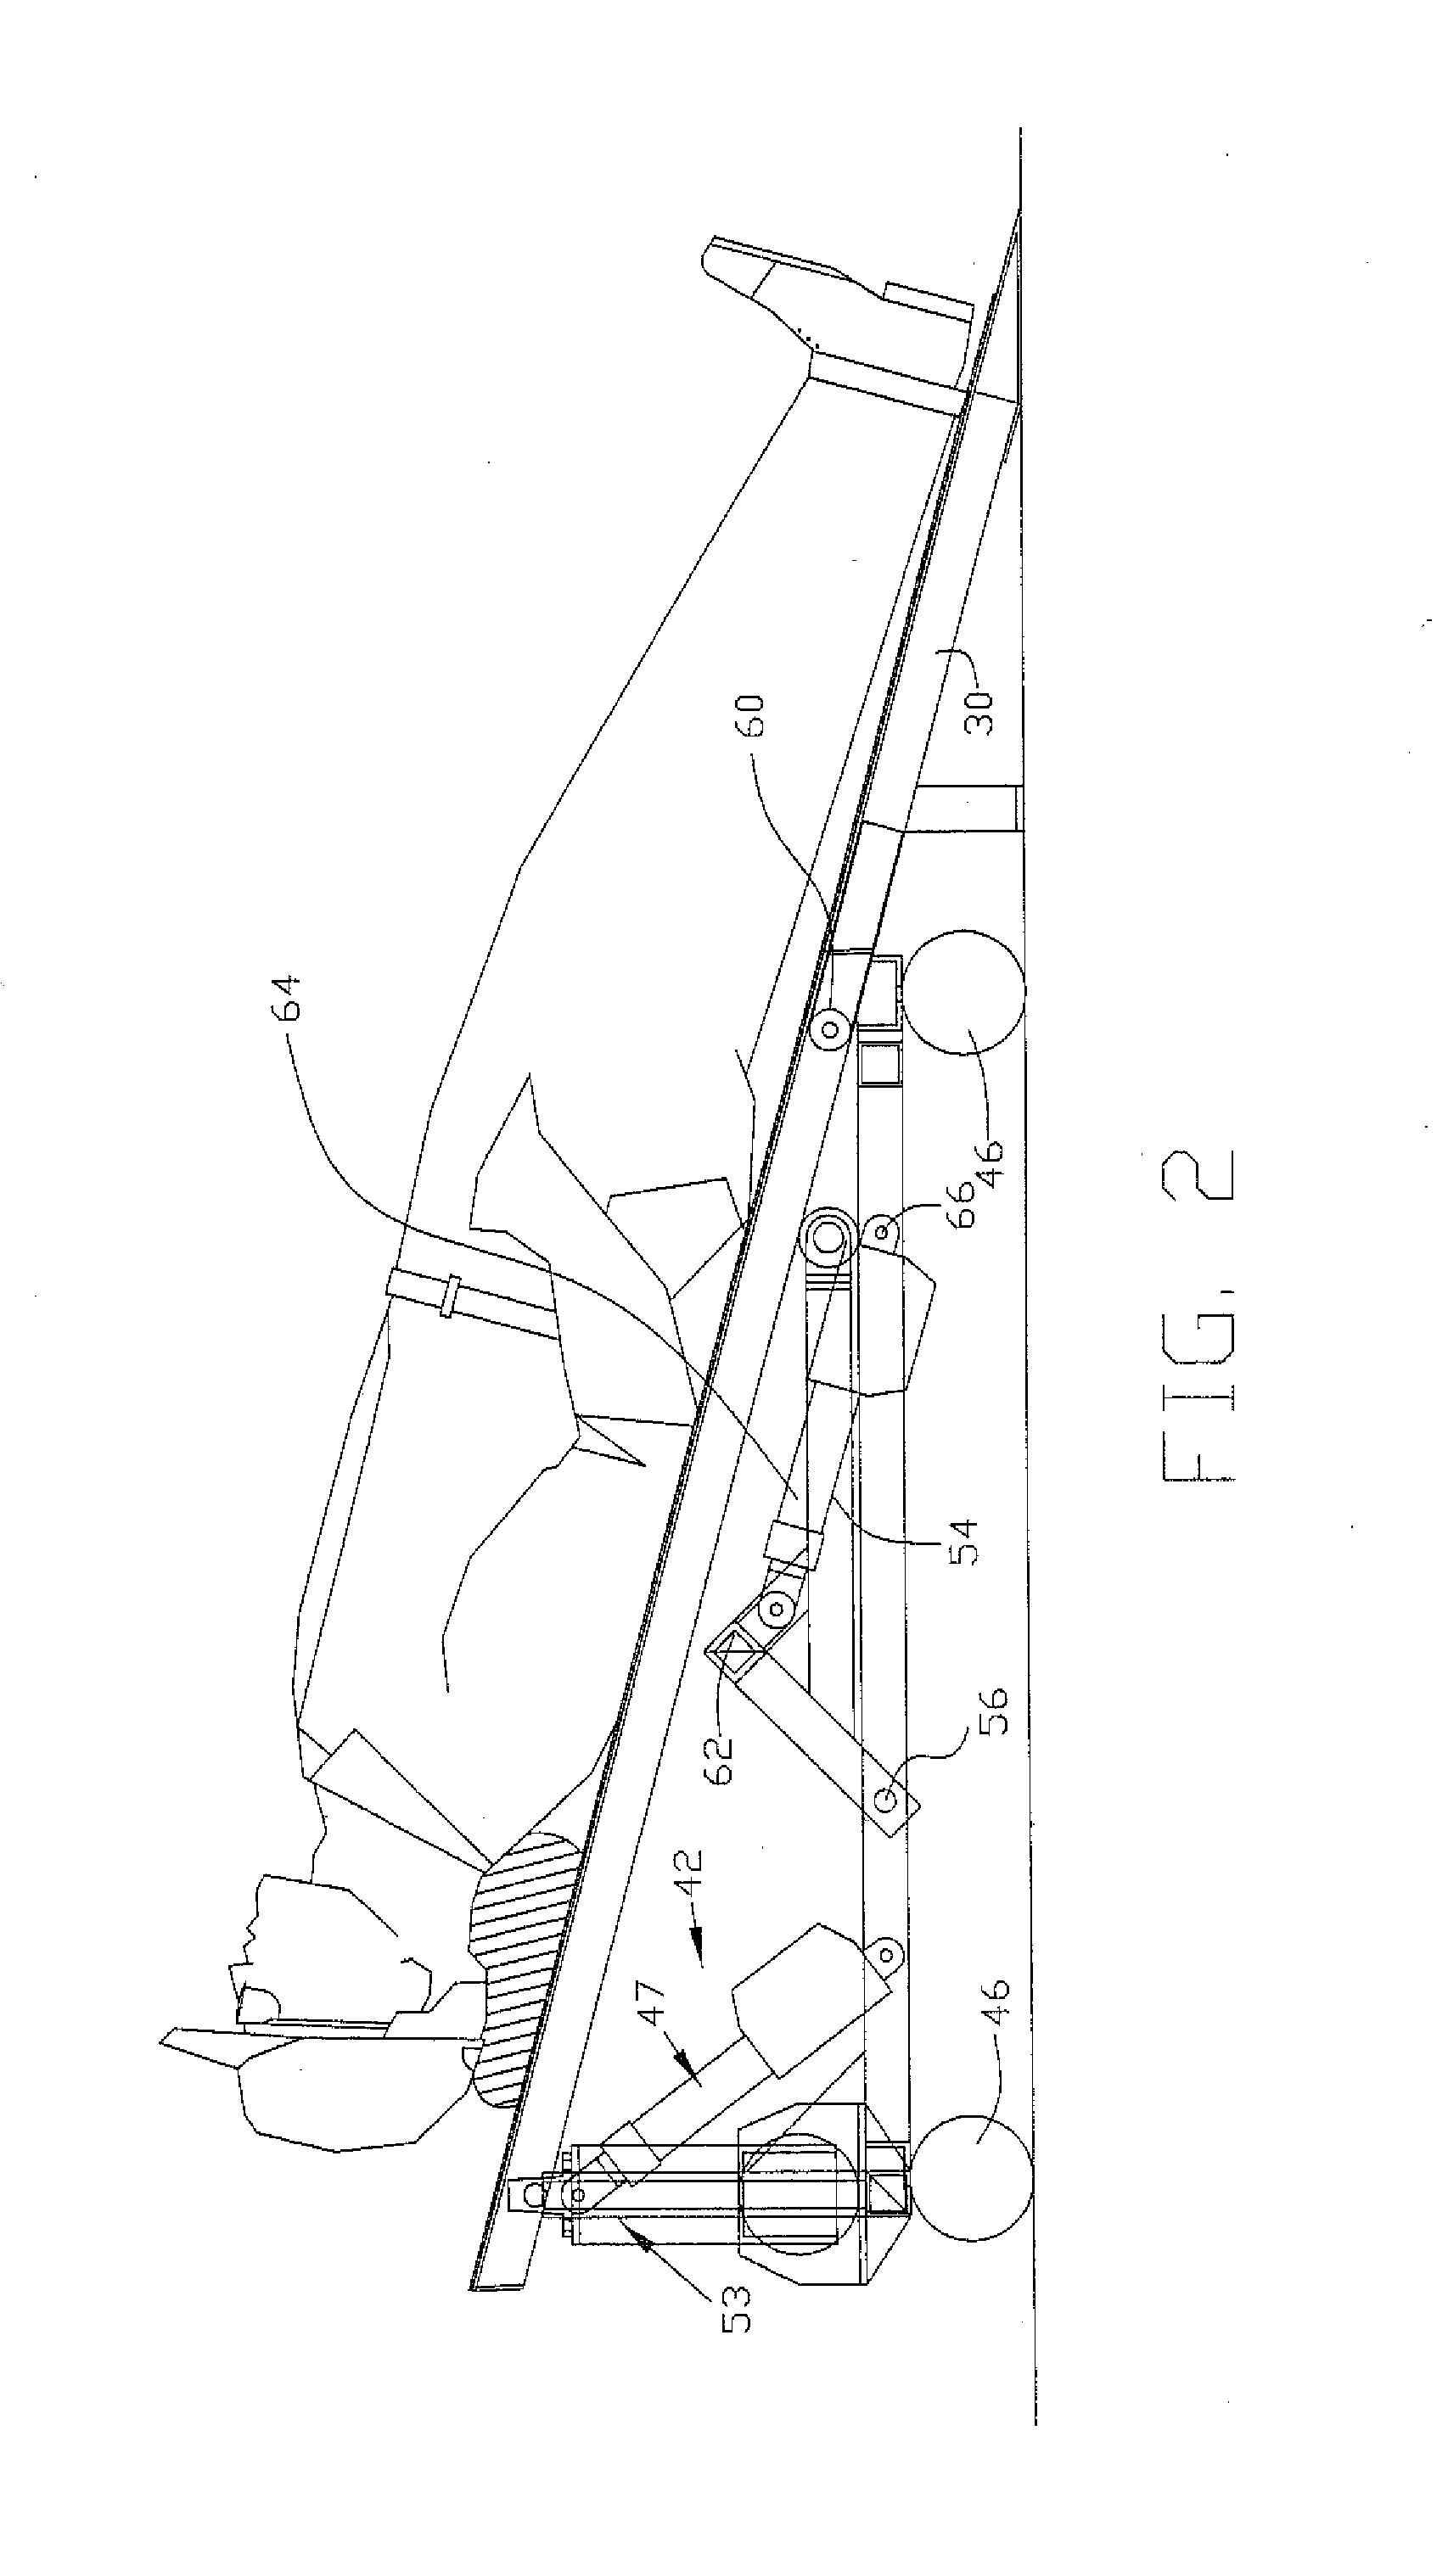 Patient lifting device